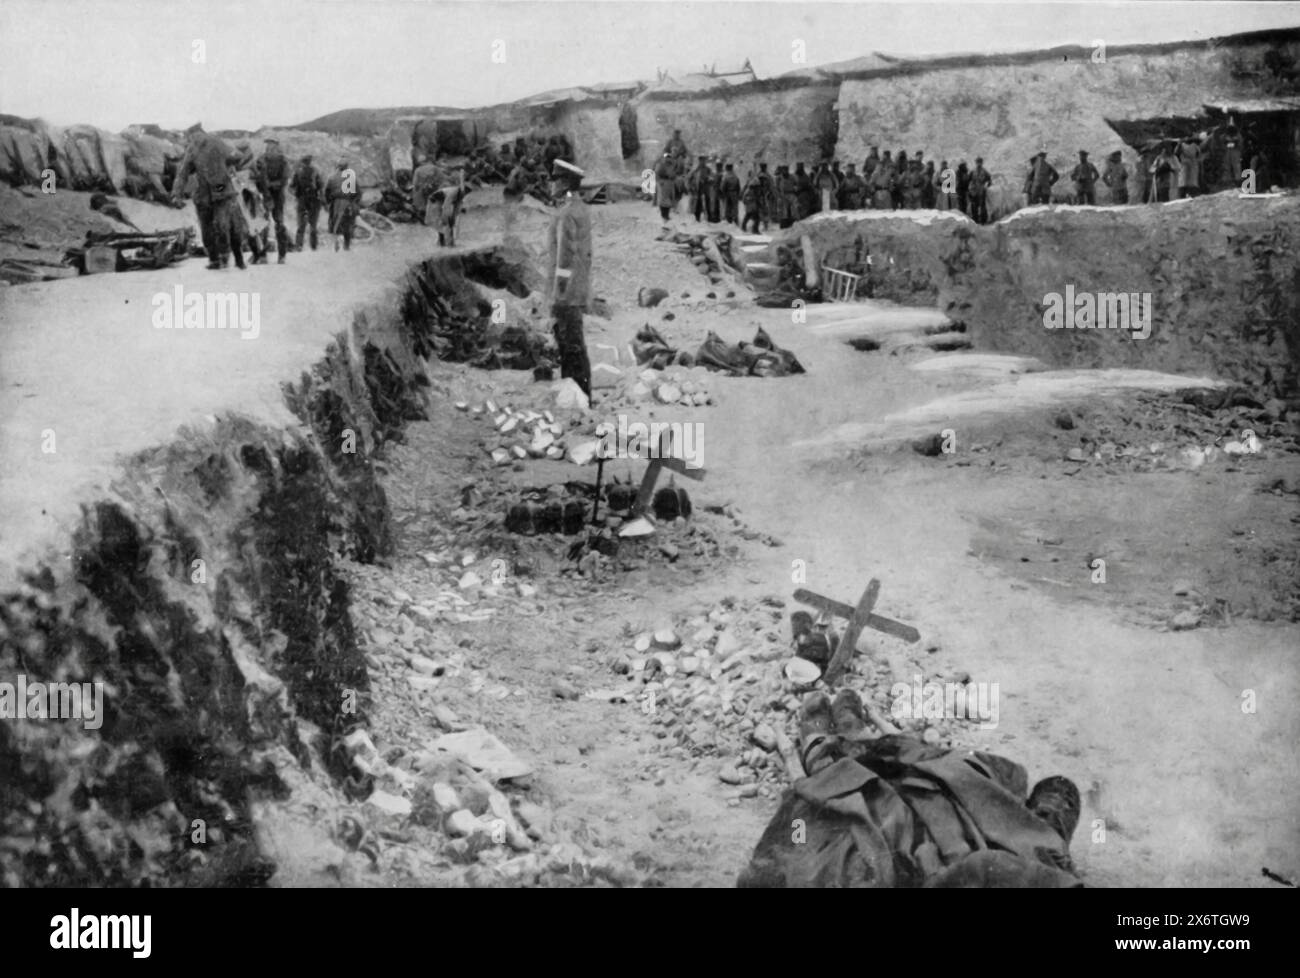 A photograph of a stone quarry near Hulluch, taken shortly after the Battle of Loos and the Allied advance of September 1915. Once considered impregnable due to its strong fortifications, the quarry was a strategic point that was highly contested during the battle. The presence of makeshift grave markers highlights the heavy casualties and the human cost of the First World War. Stock Photo